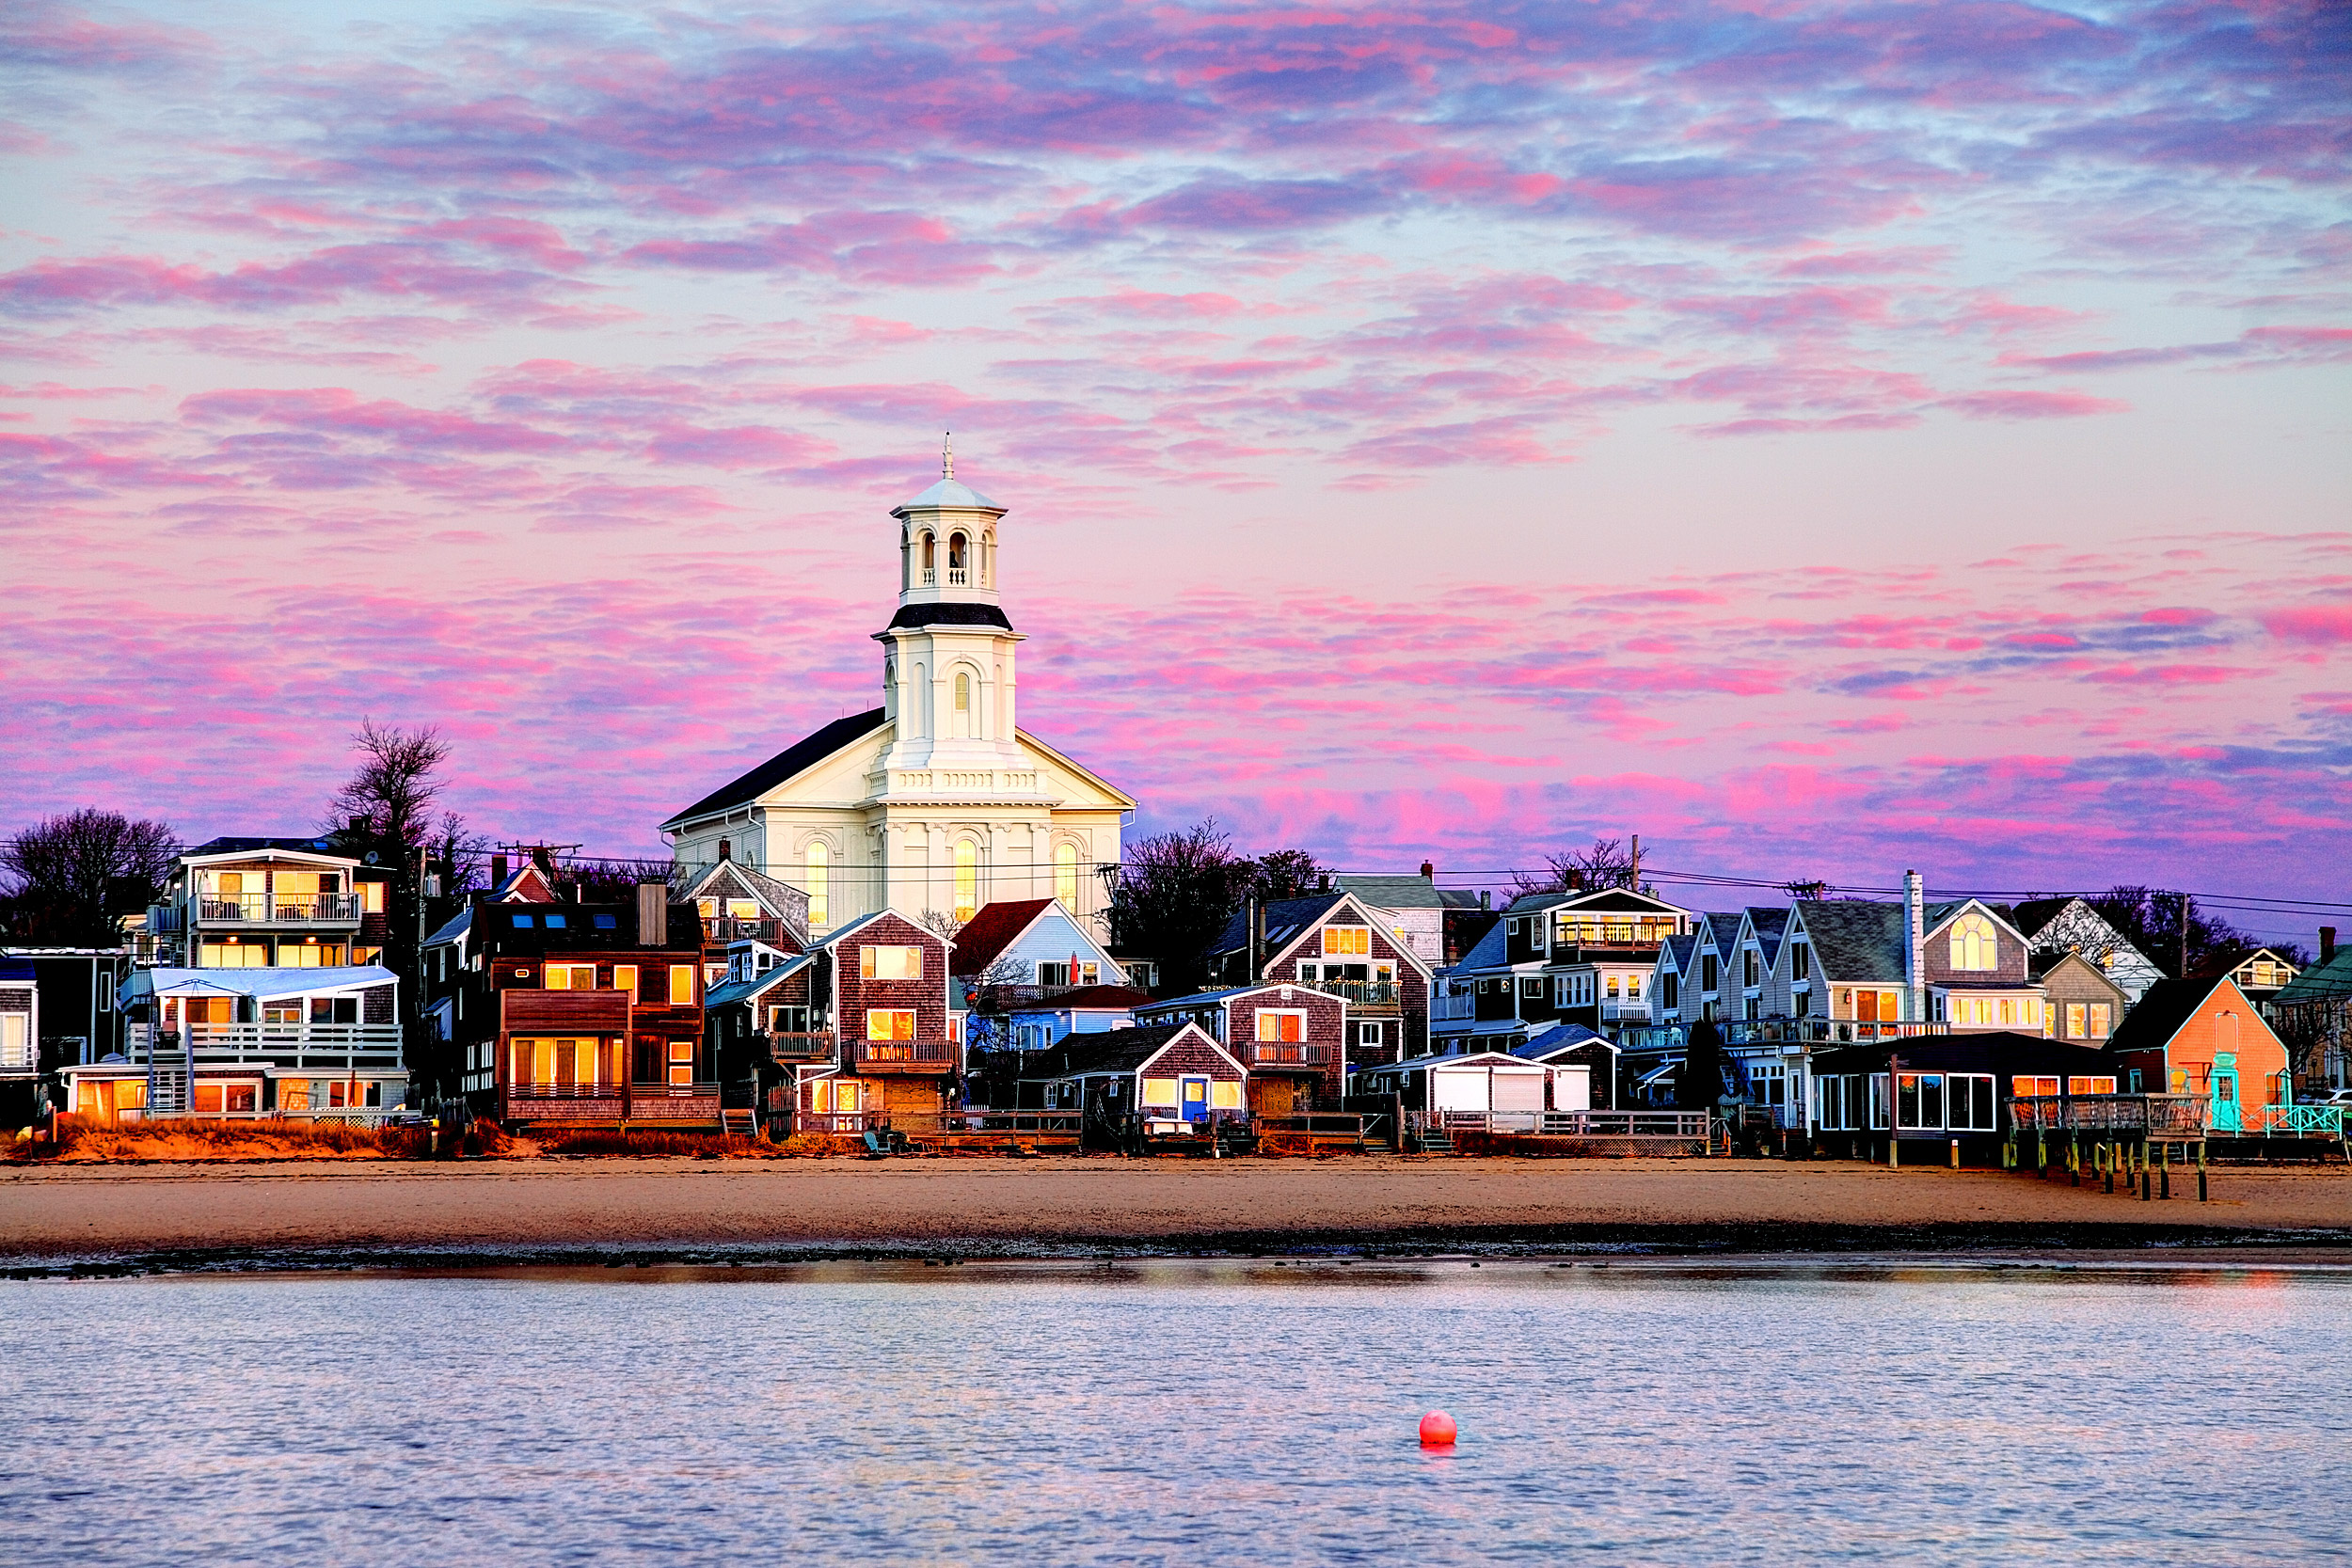 Sunset in Provincetown.